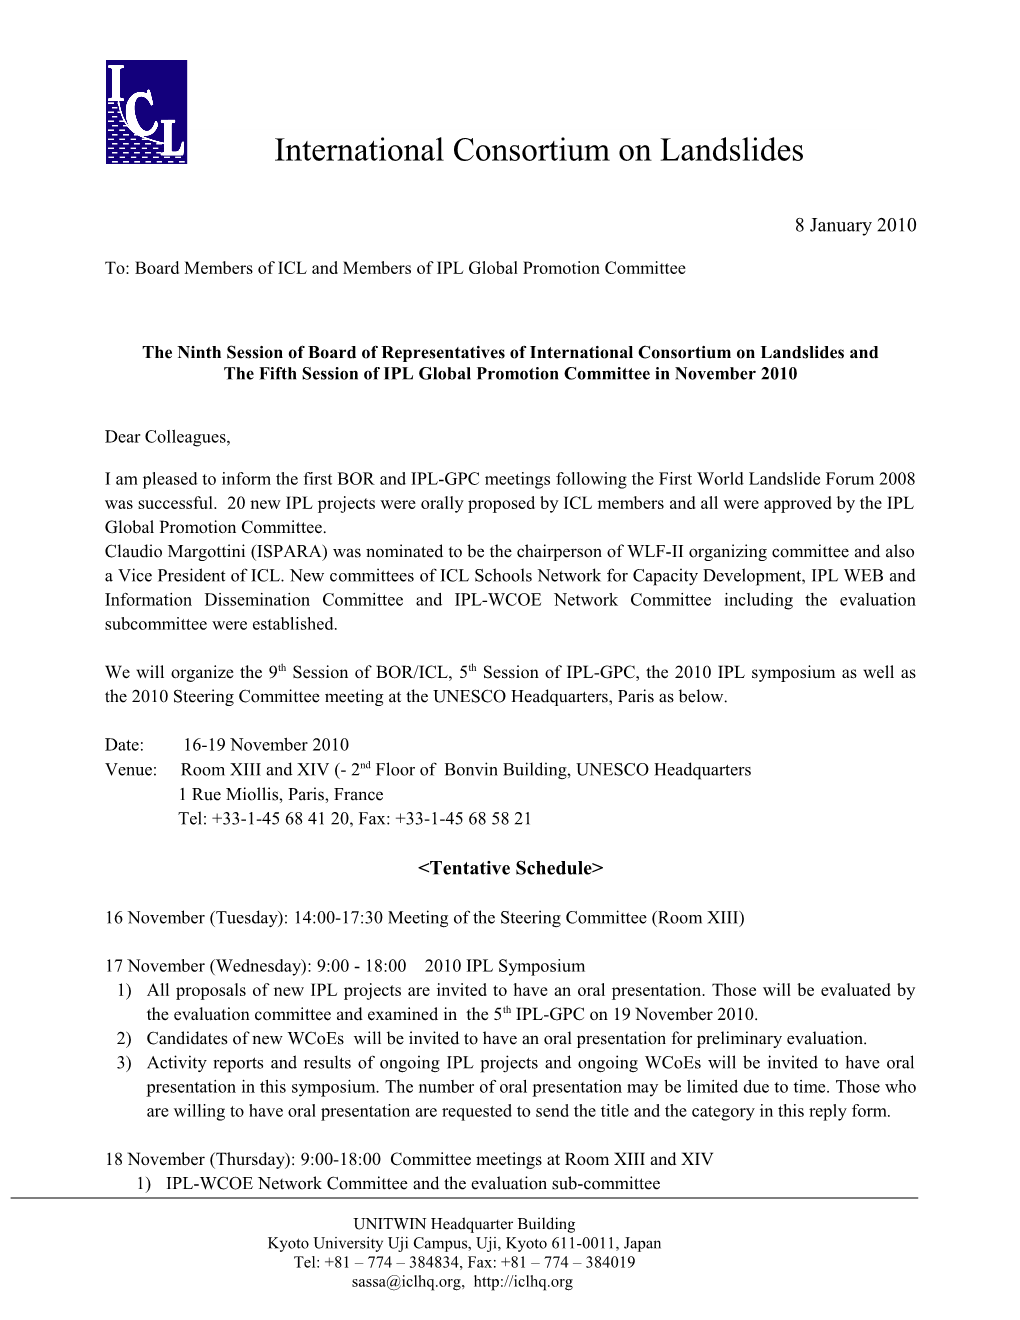 The Ninth Session of Board of Representatives of International Consortium on Landslides And